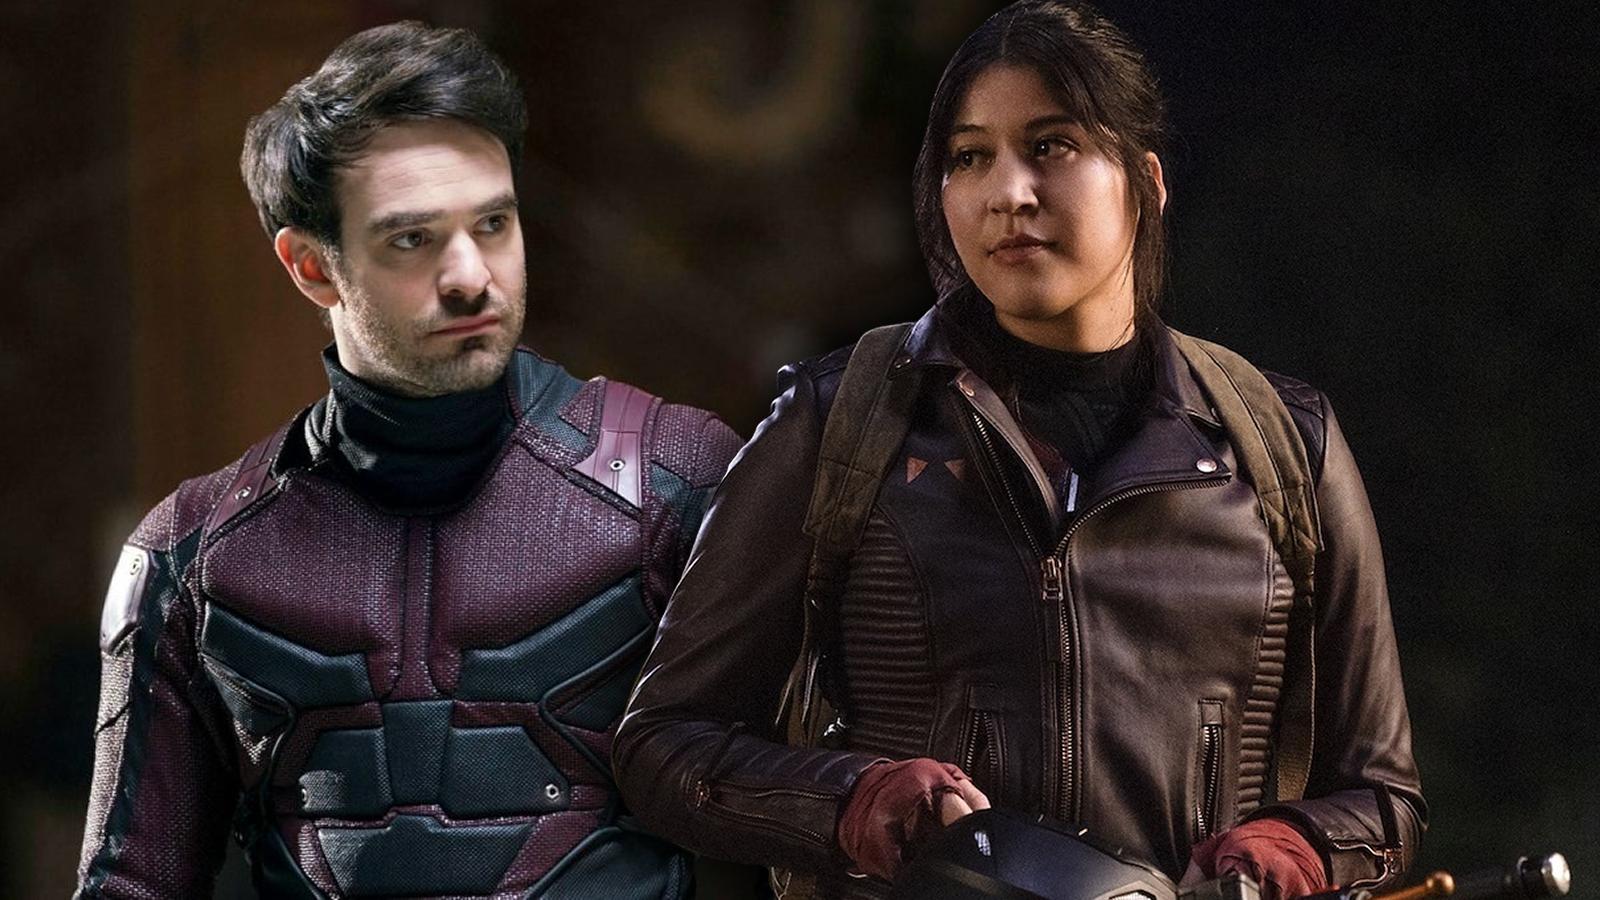 Combined stills featuring Echo and Daredevil